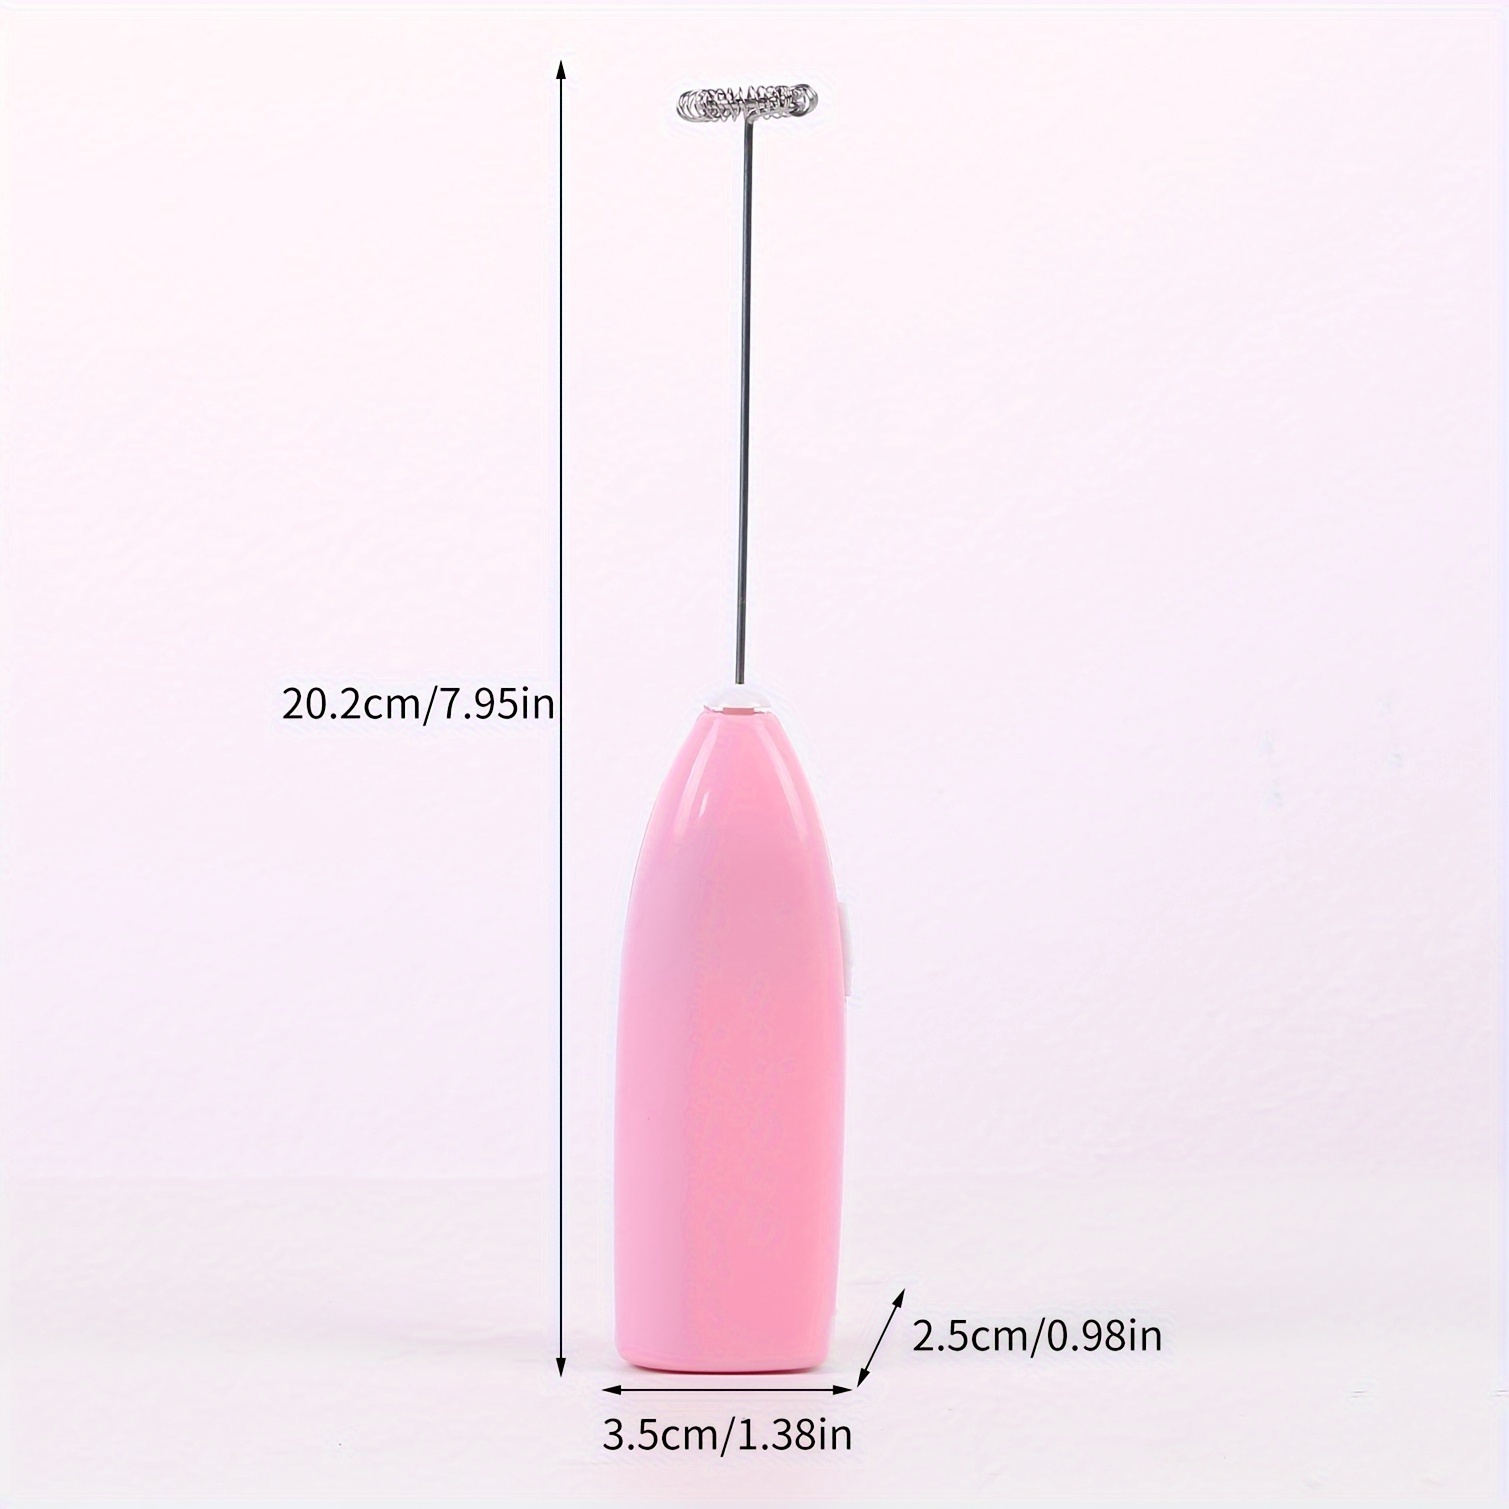 MINI COFFEE FOAMER Fast Electric Coffee Stirrer for Home Cooking Tool  (Pink) $9.59 - PicClick AU